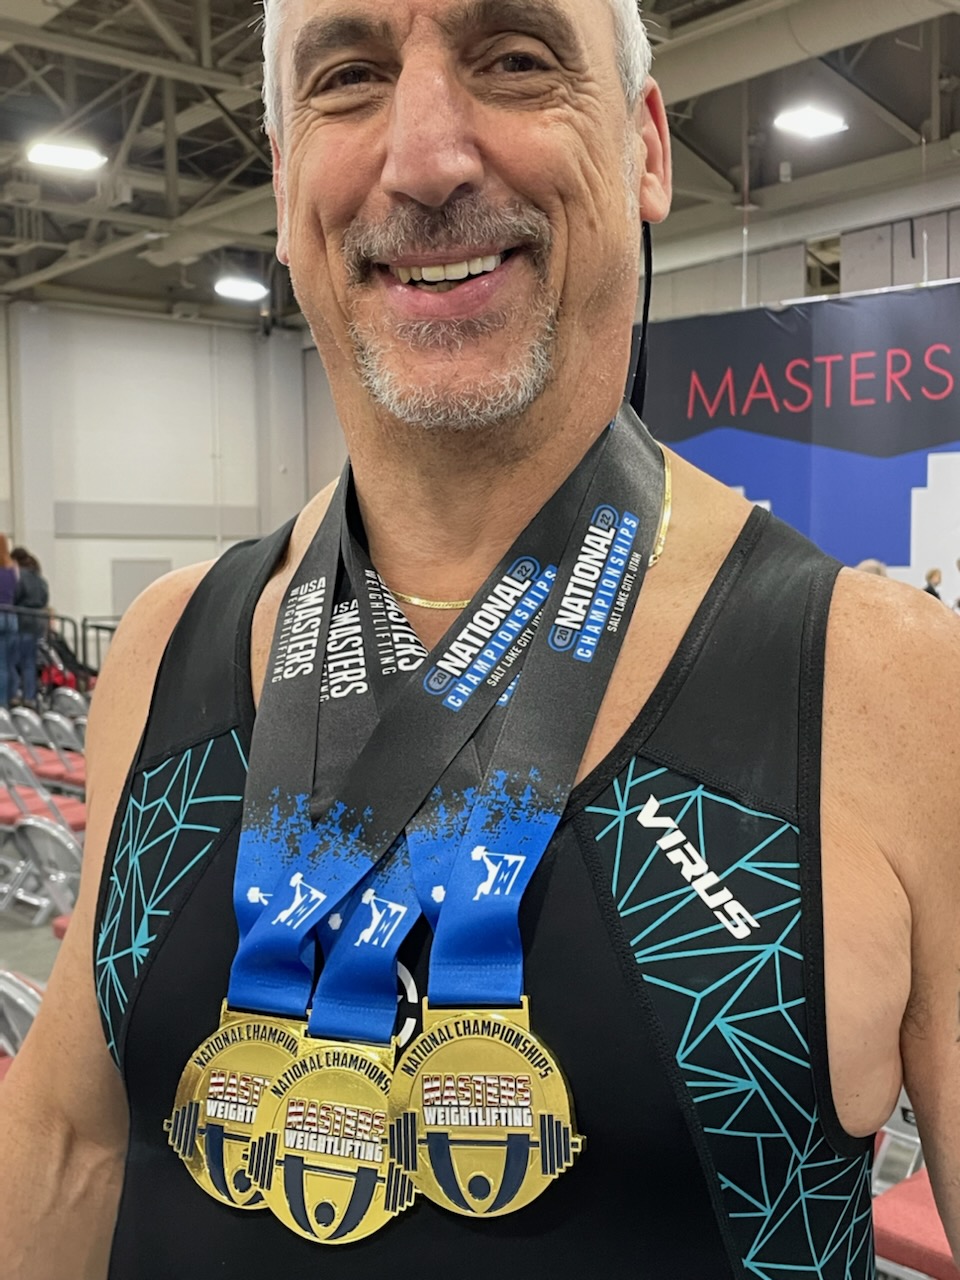 A man smiles with three gold medals around his neck